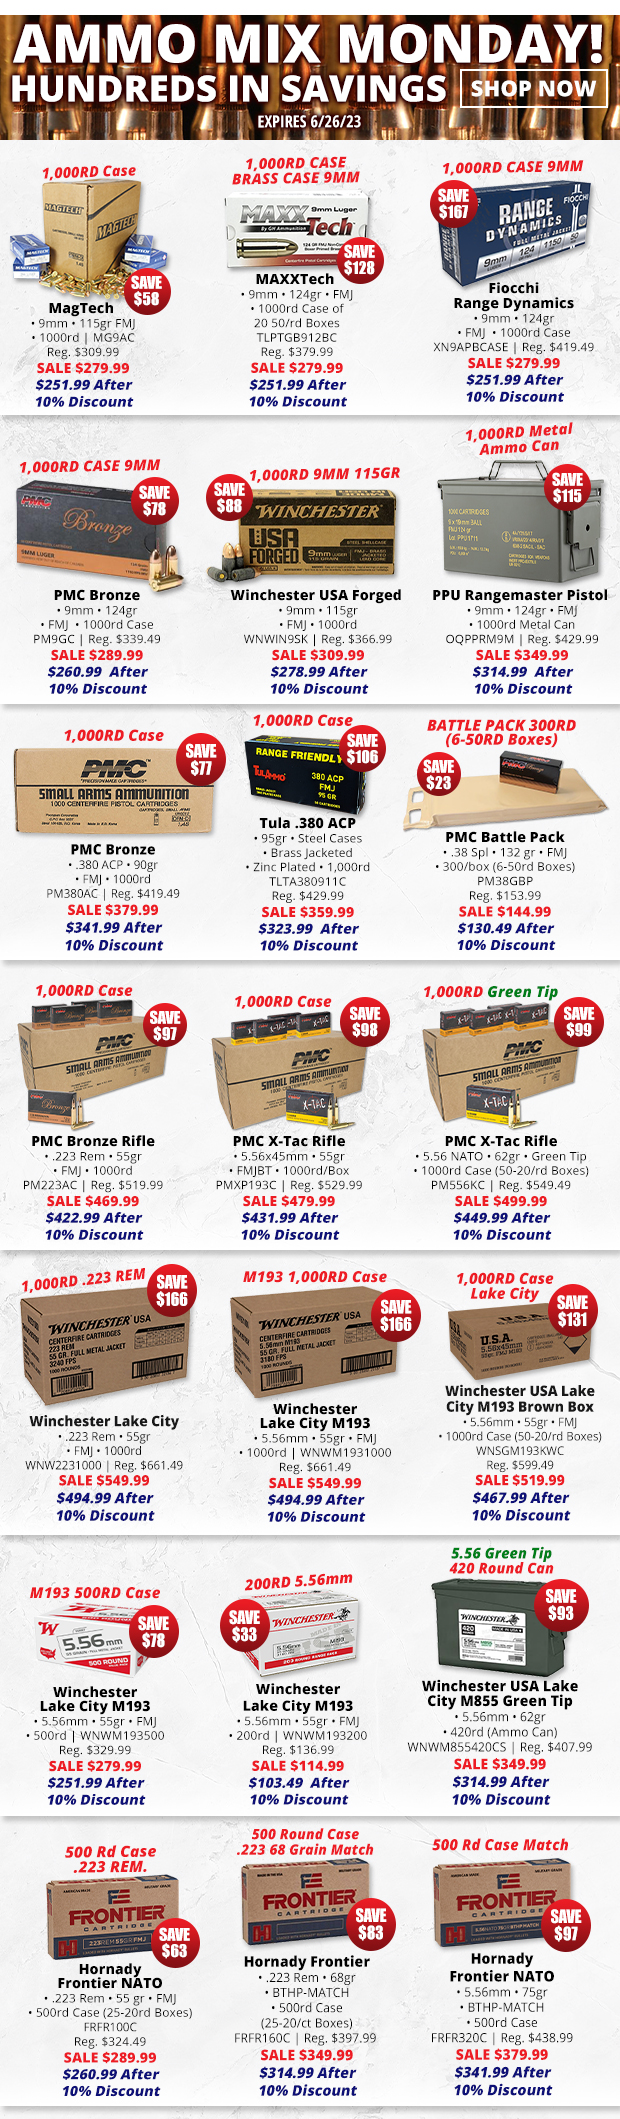 Ammo Deals with Hundreds in Savings!